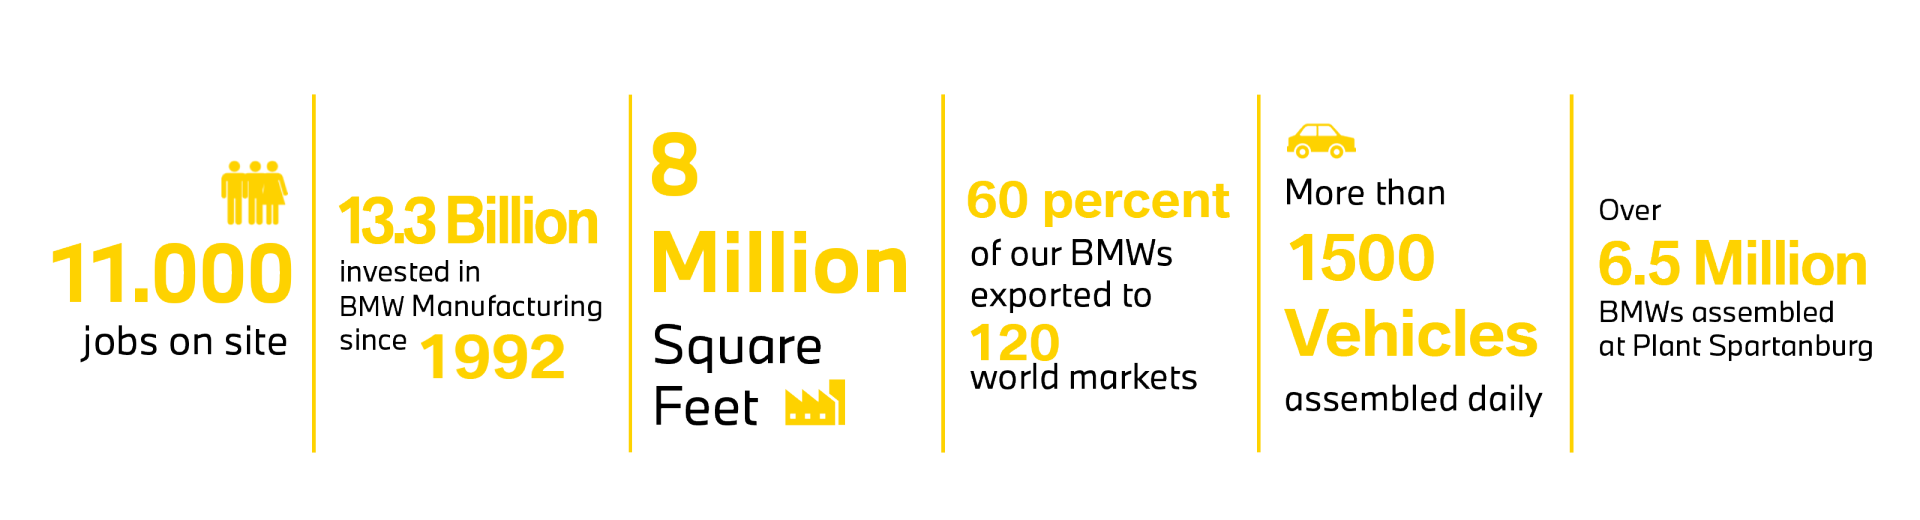 Graphic with Plant Spartanburg stats: 11,000 jobs onsite, 13.3 billion invested since 1992, 8 million square feet, 60 percent of assembled vehicles exported to 120 world markets, more than 1500 vehicles assembled daily, over 6.5 million BMW's assembled. 